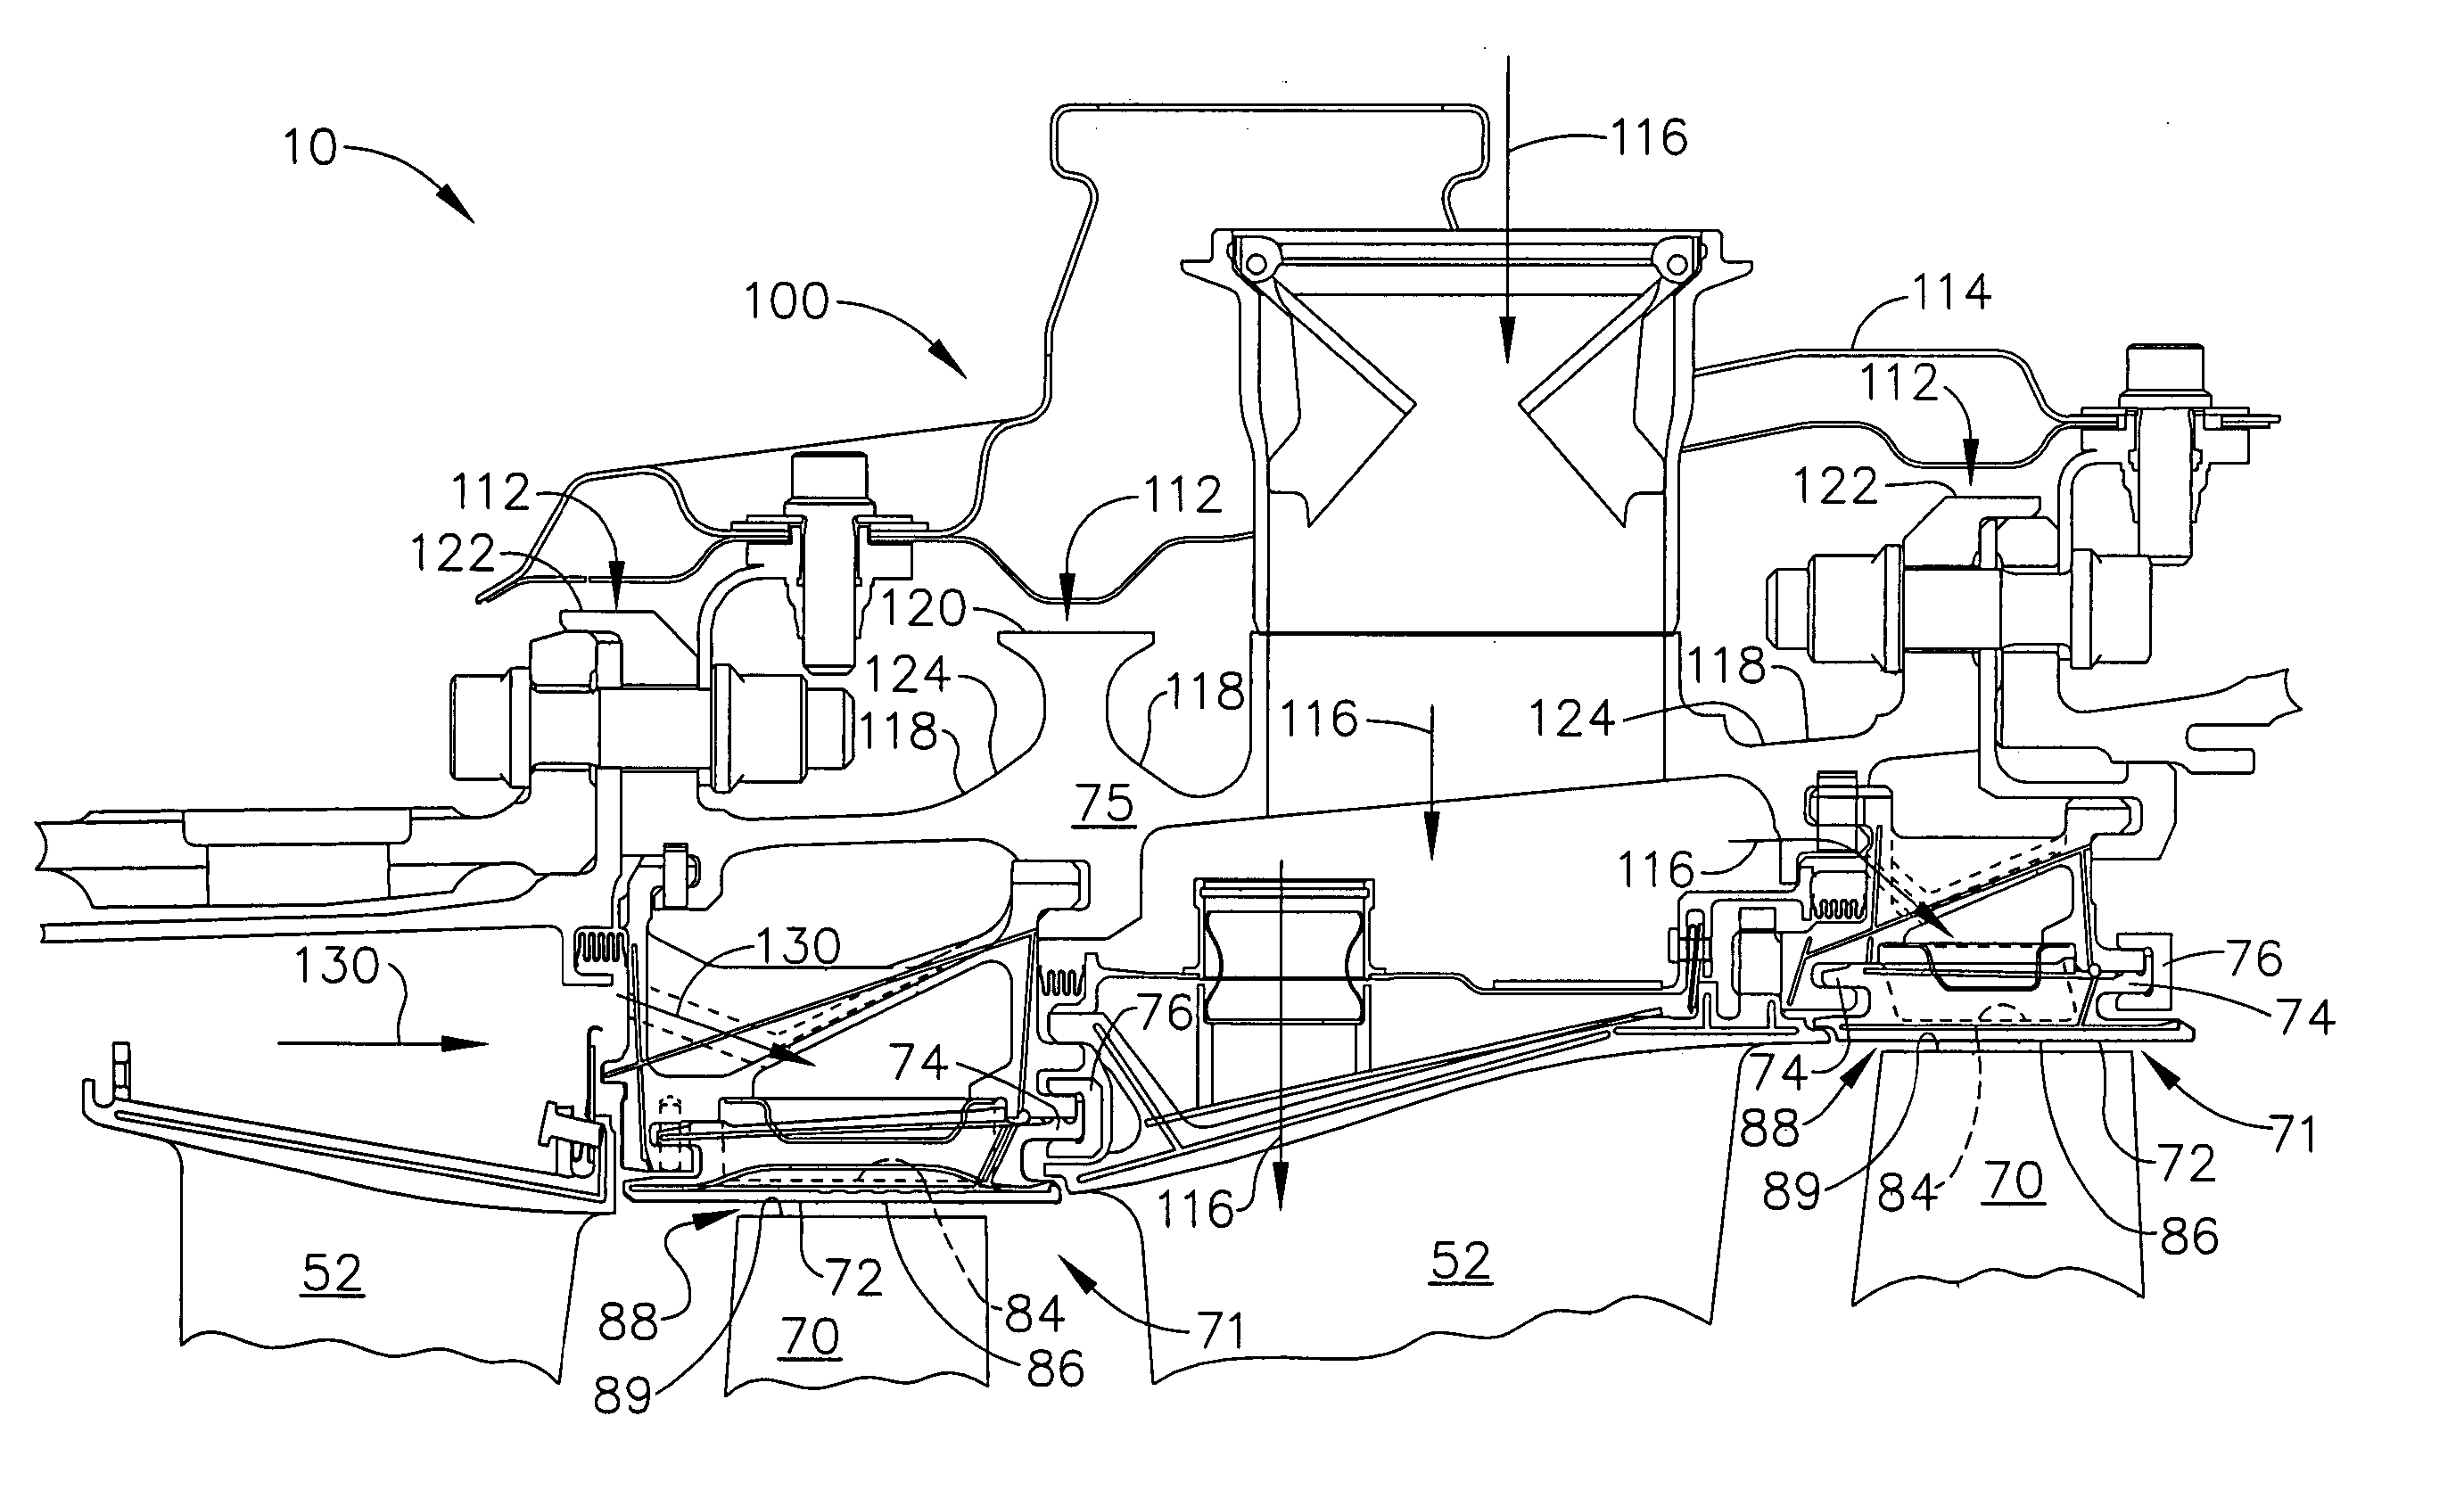 Methods and apparatus for maintaining rotor assembly tip clearances